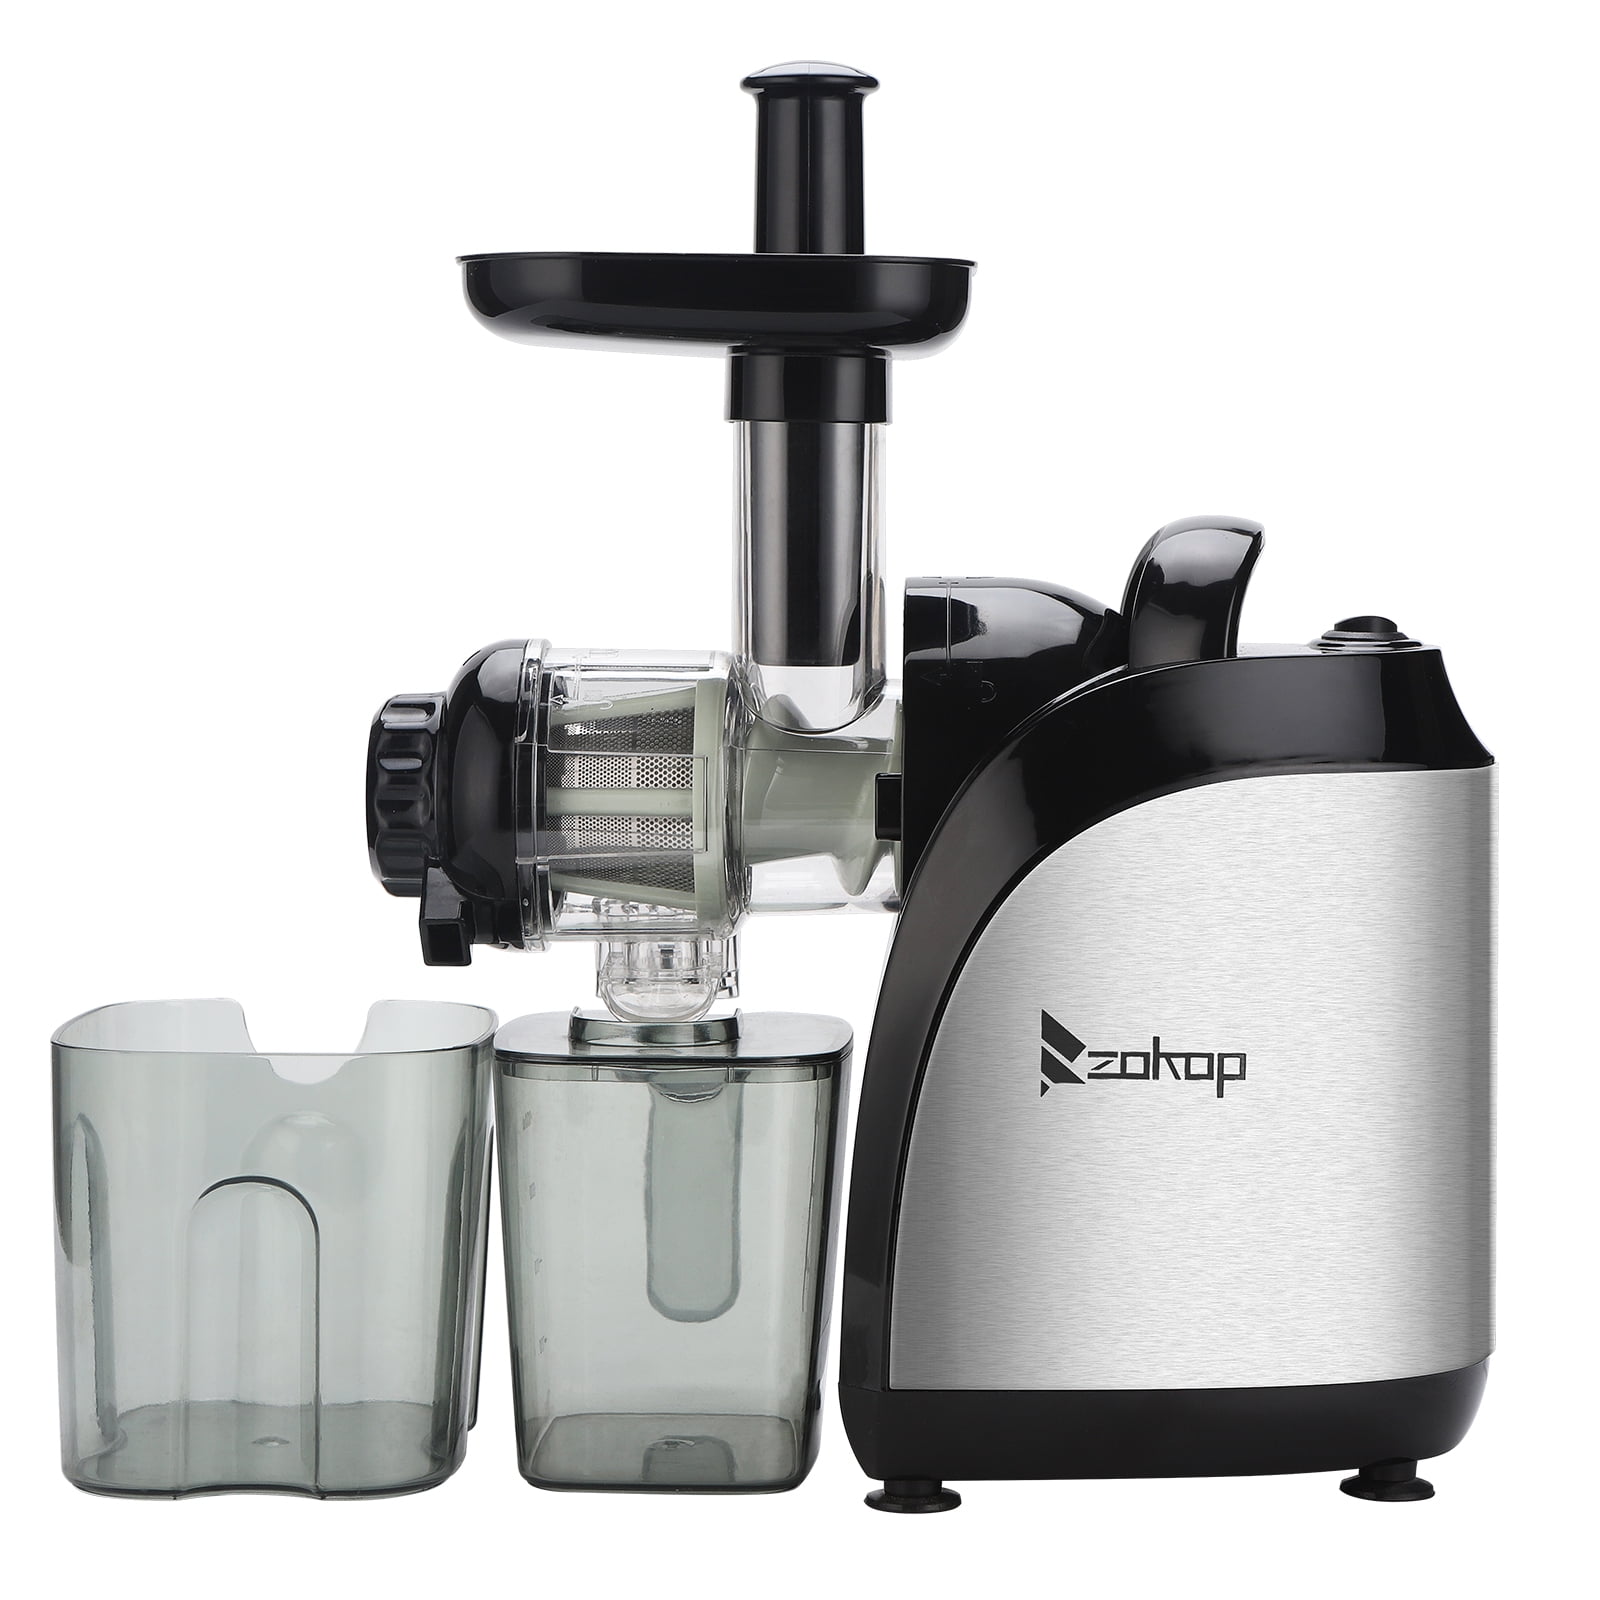 BPA-Free Encory 2 Speed Slow Masticating Juicer Extractor Cold Press Juicer with Brush Silver & Black, 150W Juicer Machines for Vegetables and Fruits 